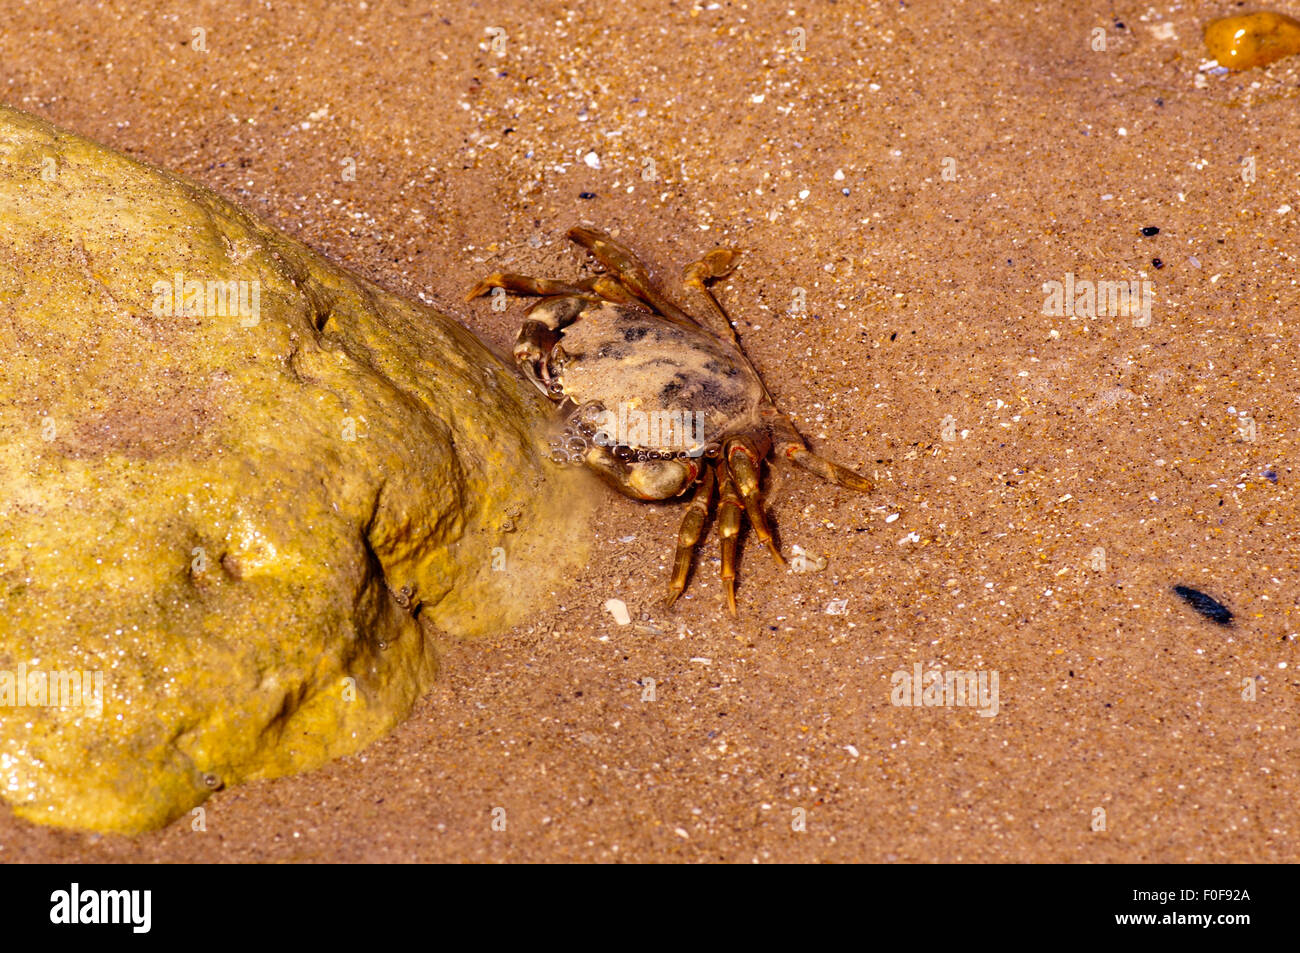 Shore Crab Carcinus maenas blowing bubbles as it burrows into the sand Stock Photo